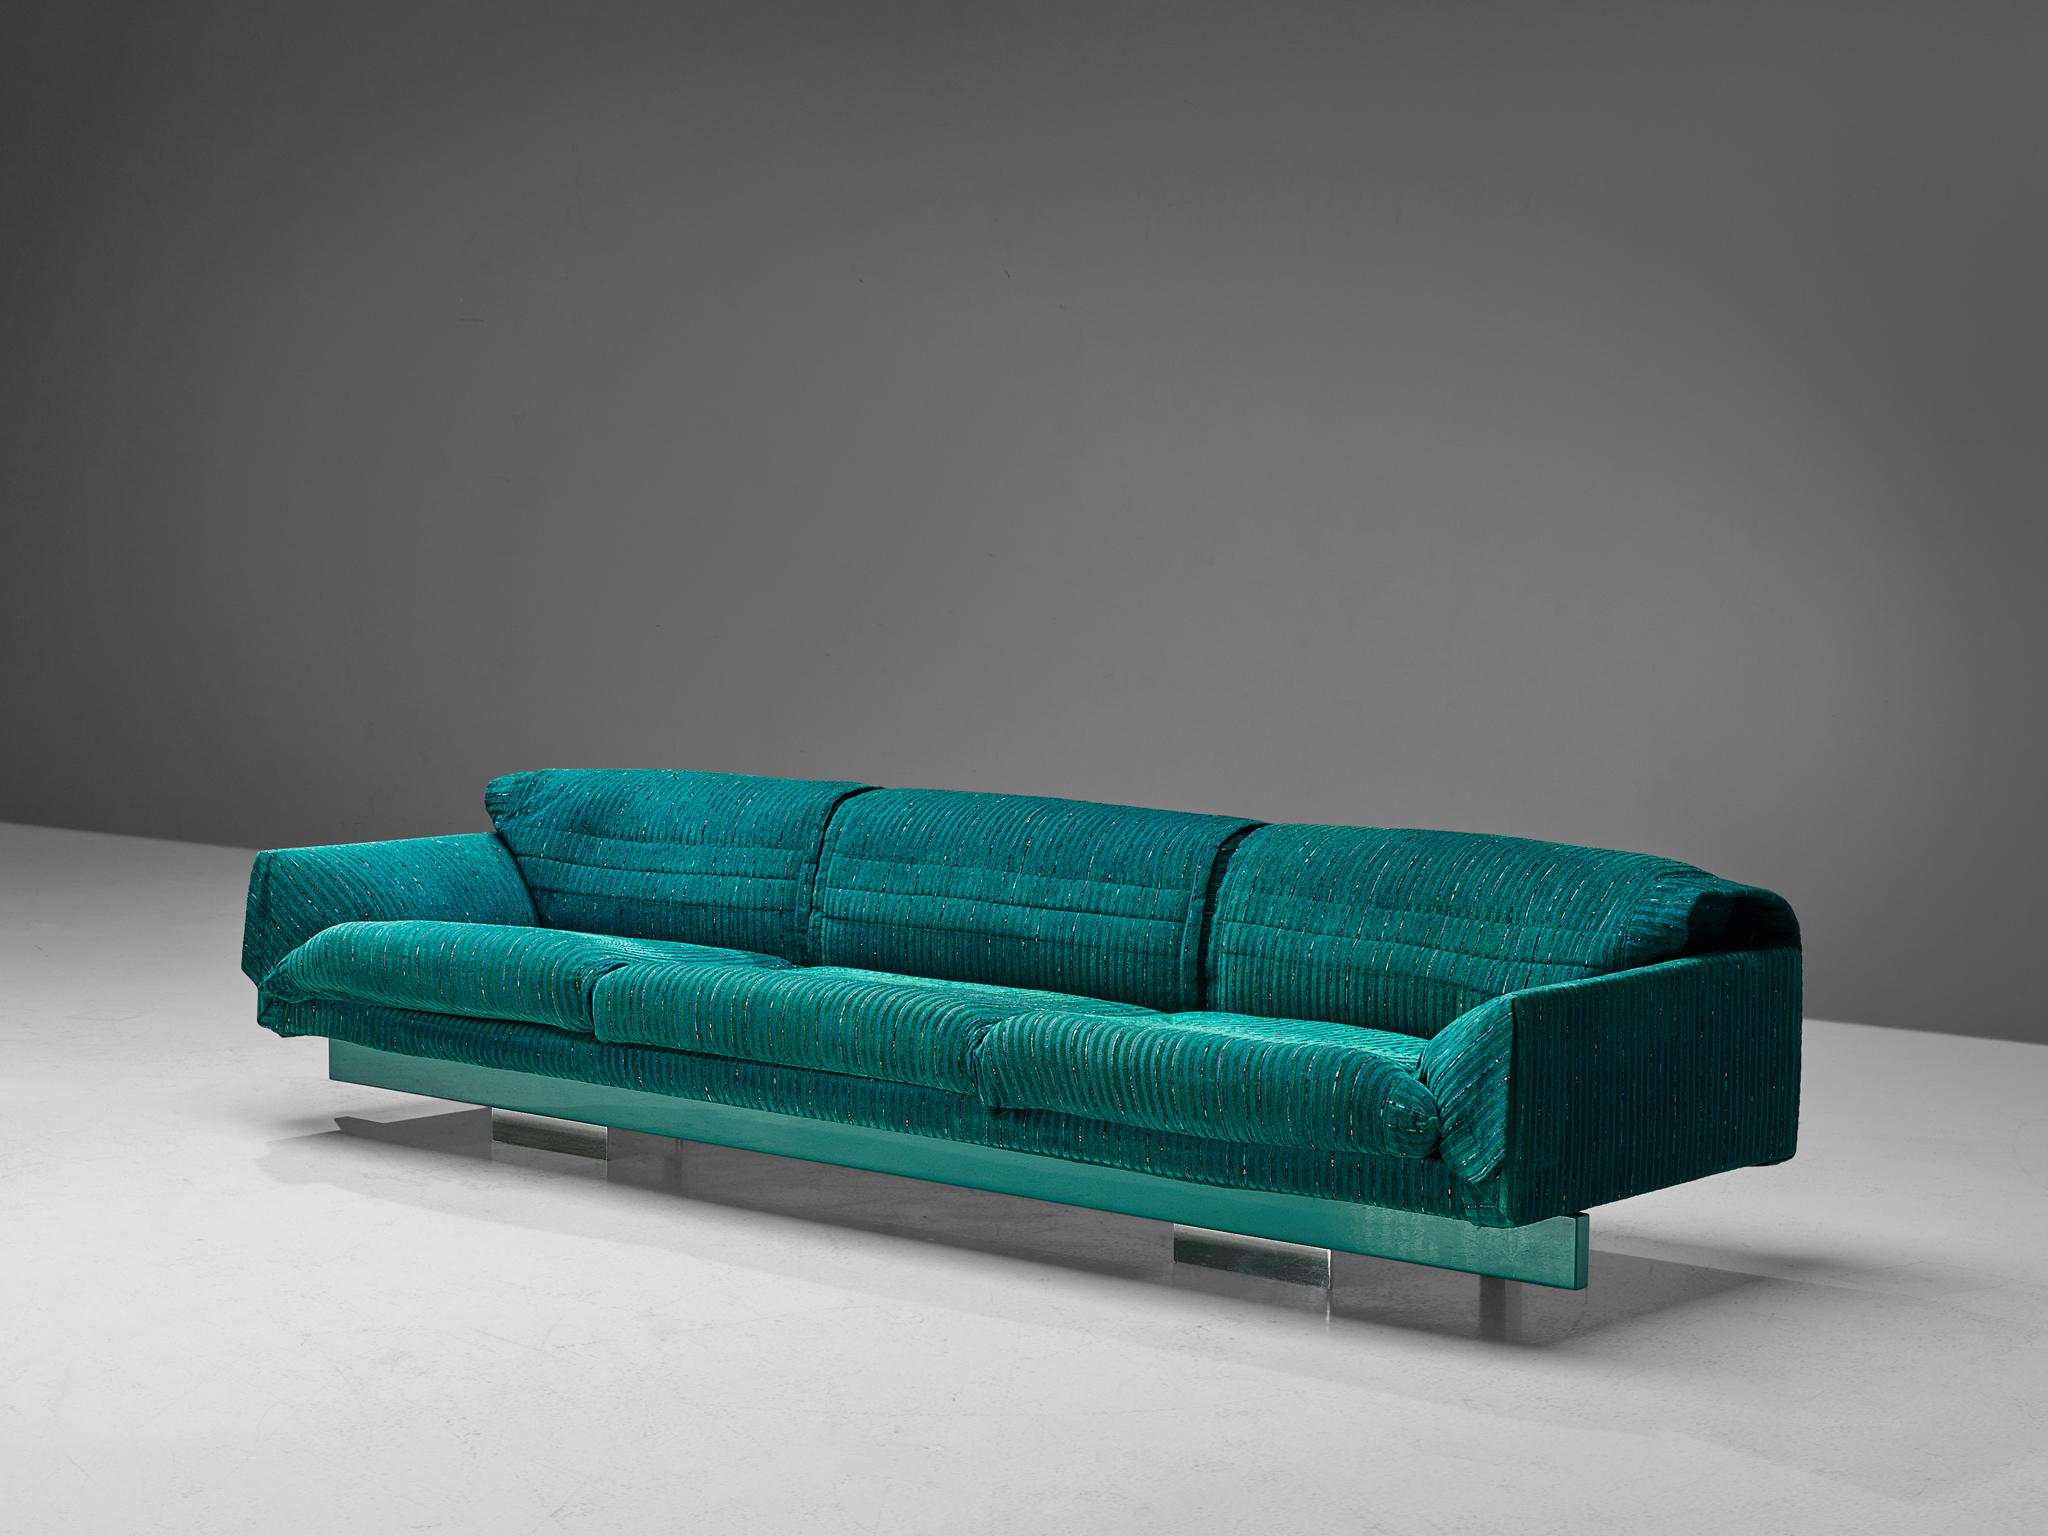 Saporiti, sofa, fabric, metal, Italy, 1950s

Large sofa manufactured by Saporiti. This sofa is designed to be comfortable, soft and inviting. It has three seats with round sloping armrest, creating a relaxed look. Notable is the fabric detailing on